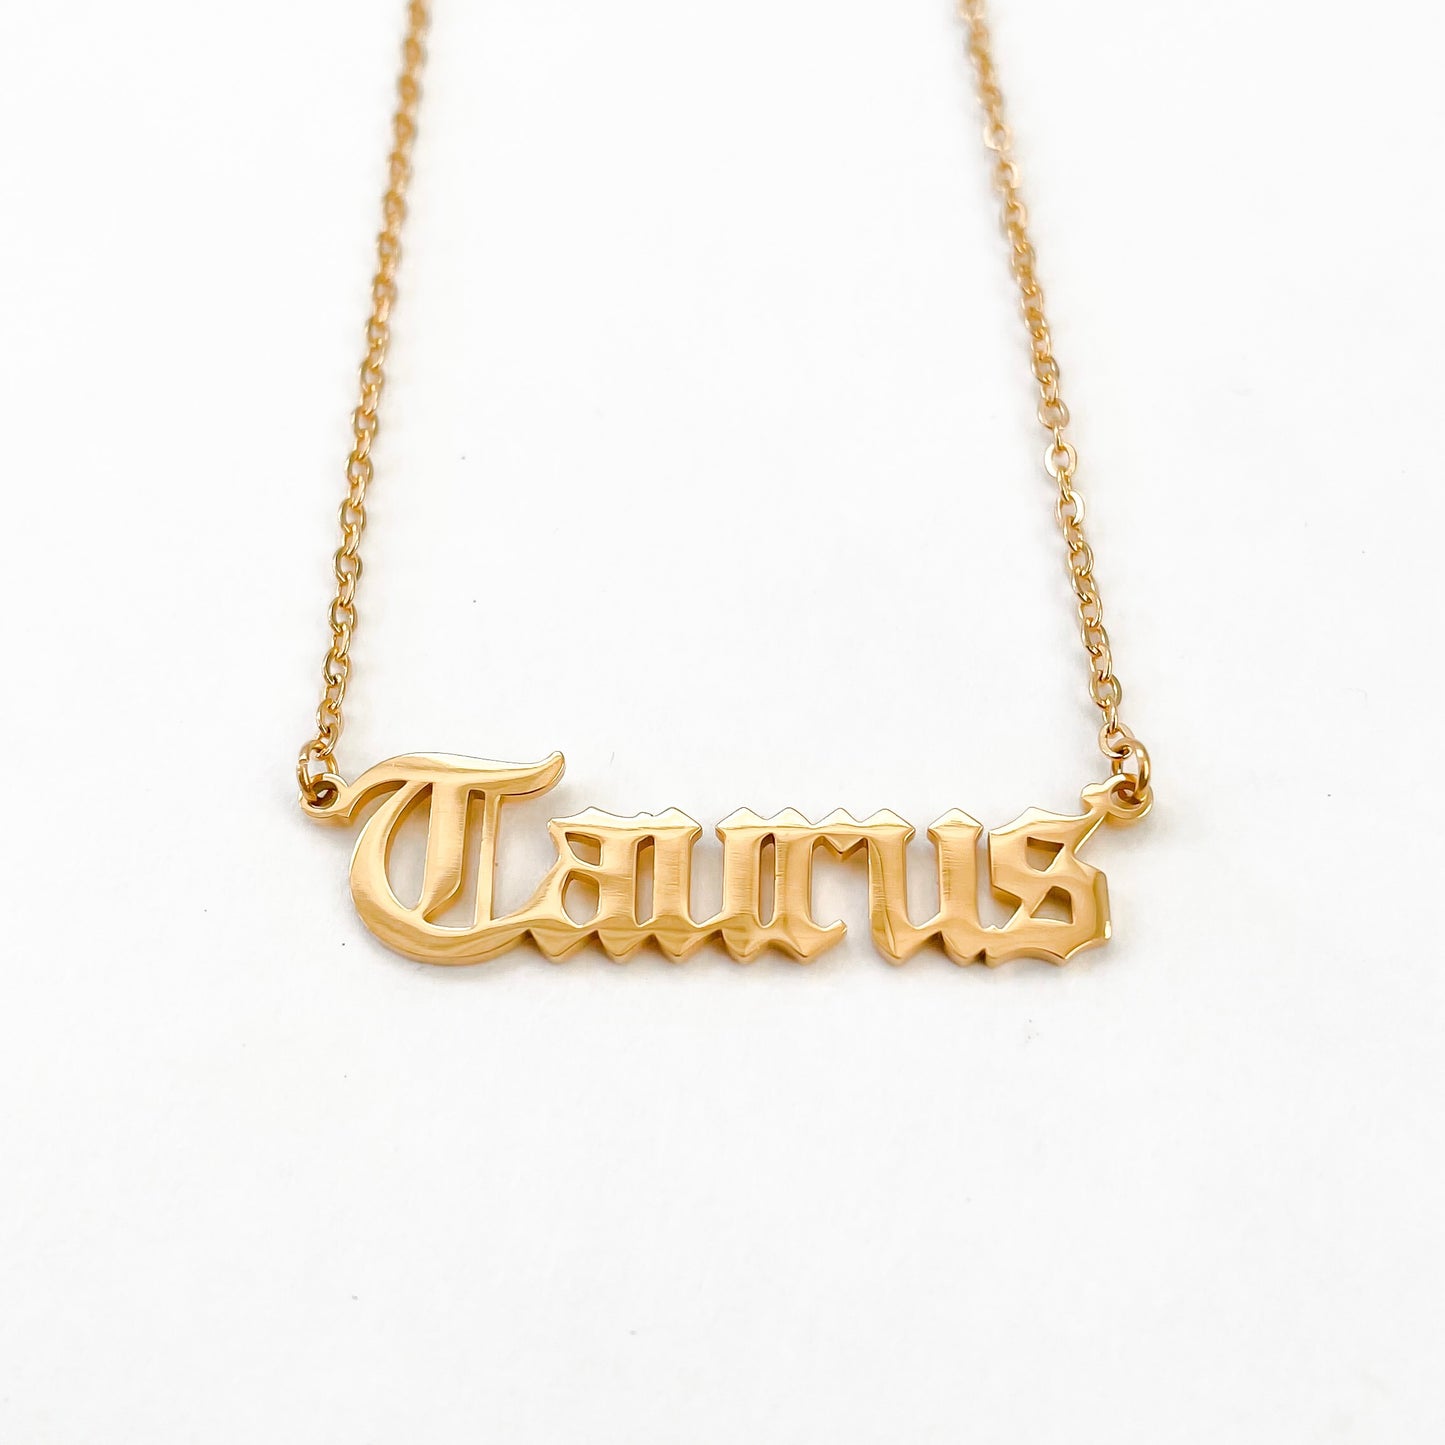 Taurus Necklace in Gold